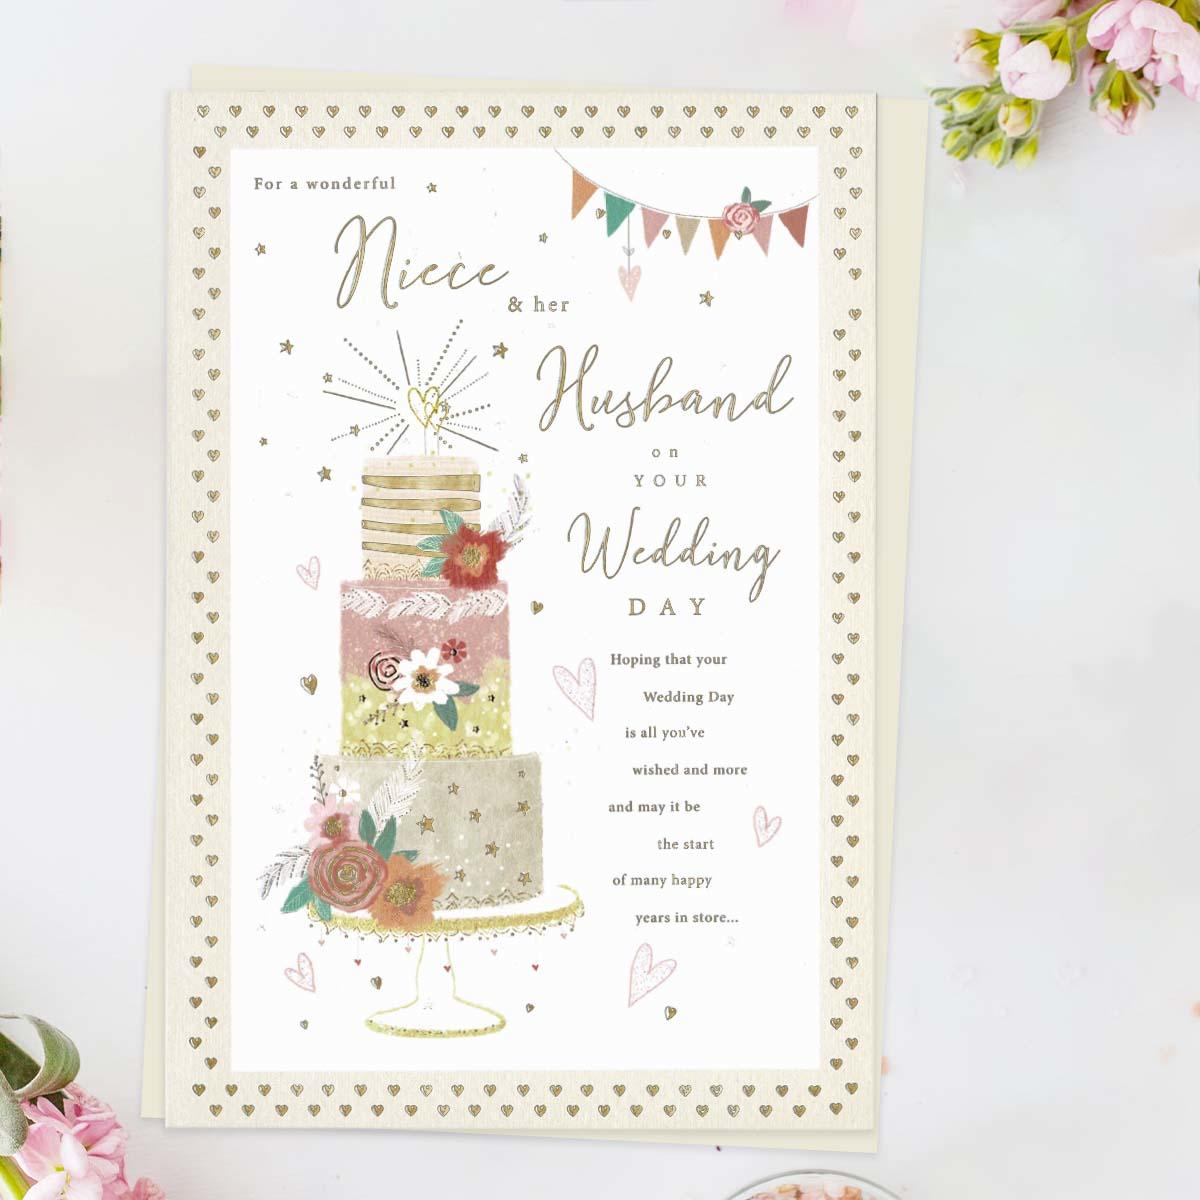 Niece And Her Husband Wedding Day Card front Image